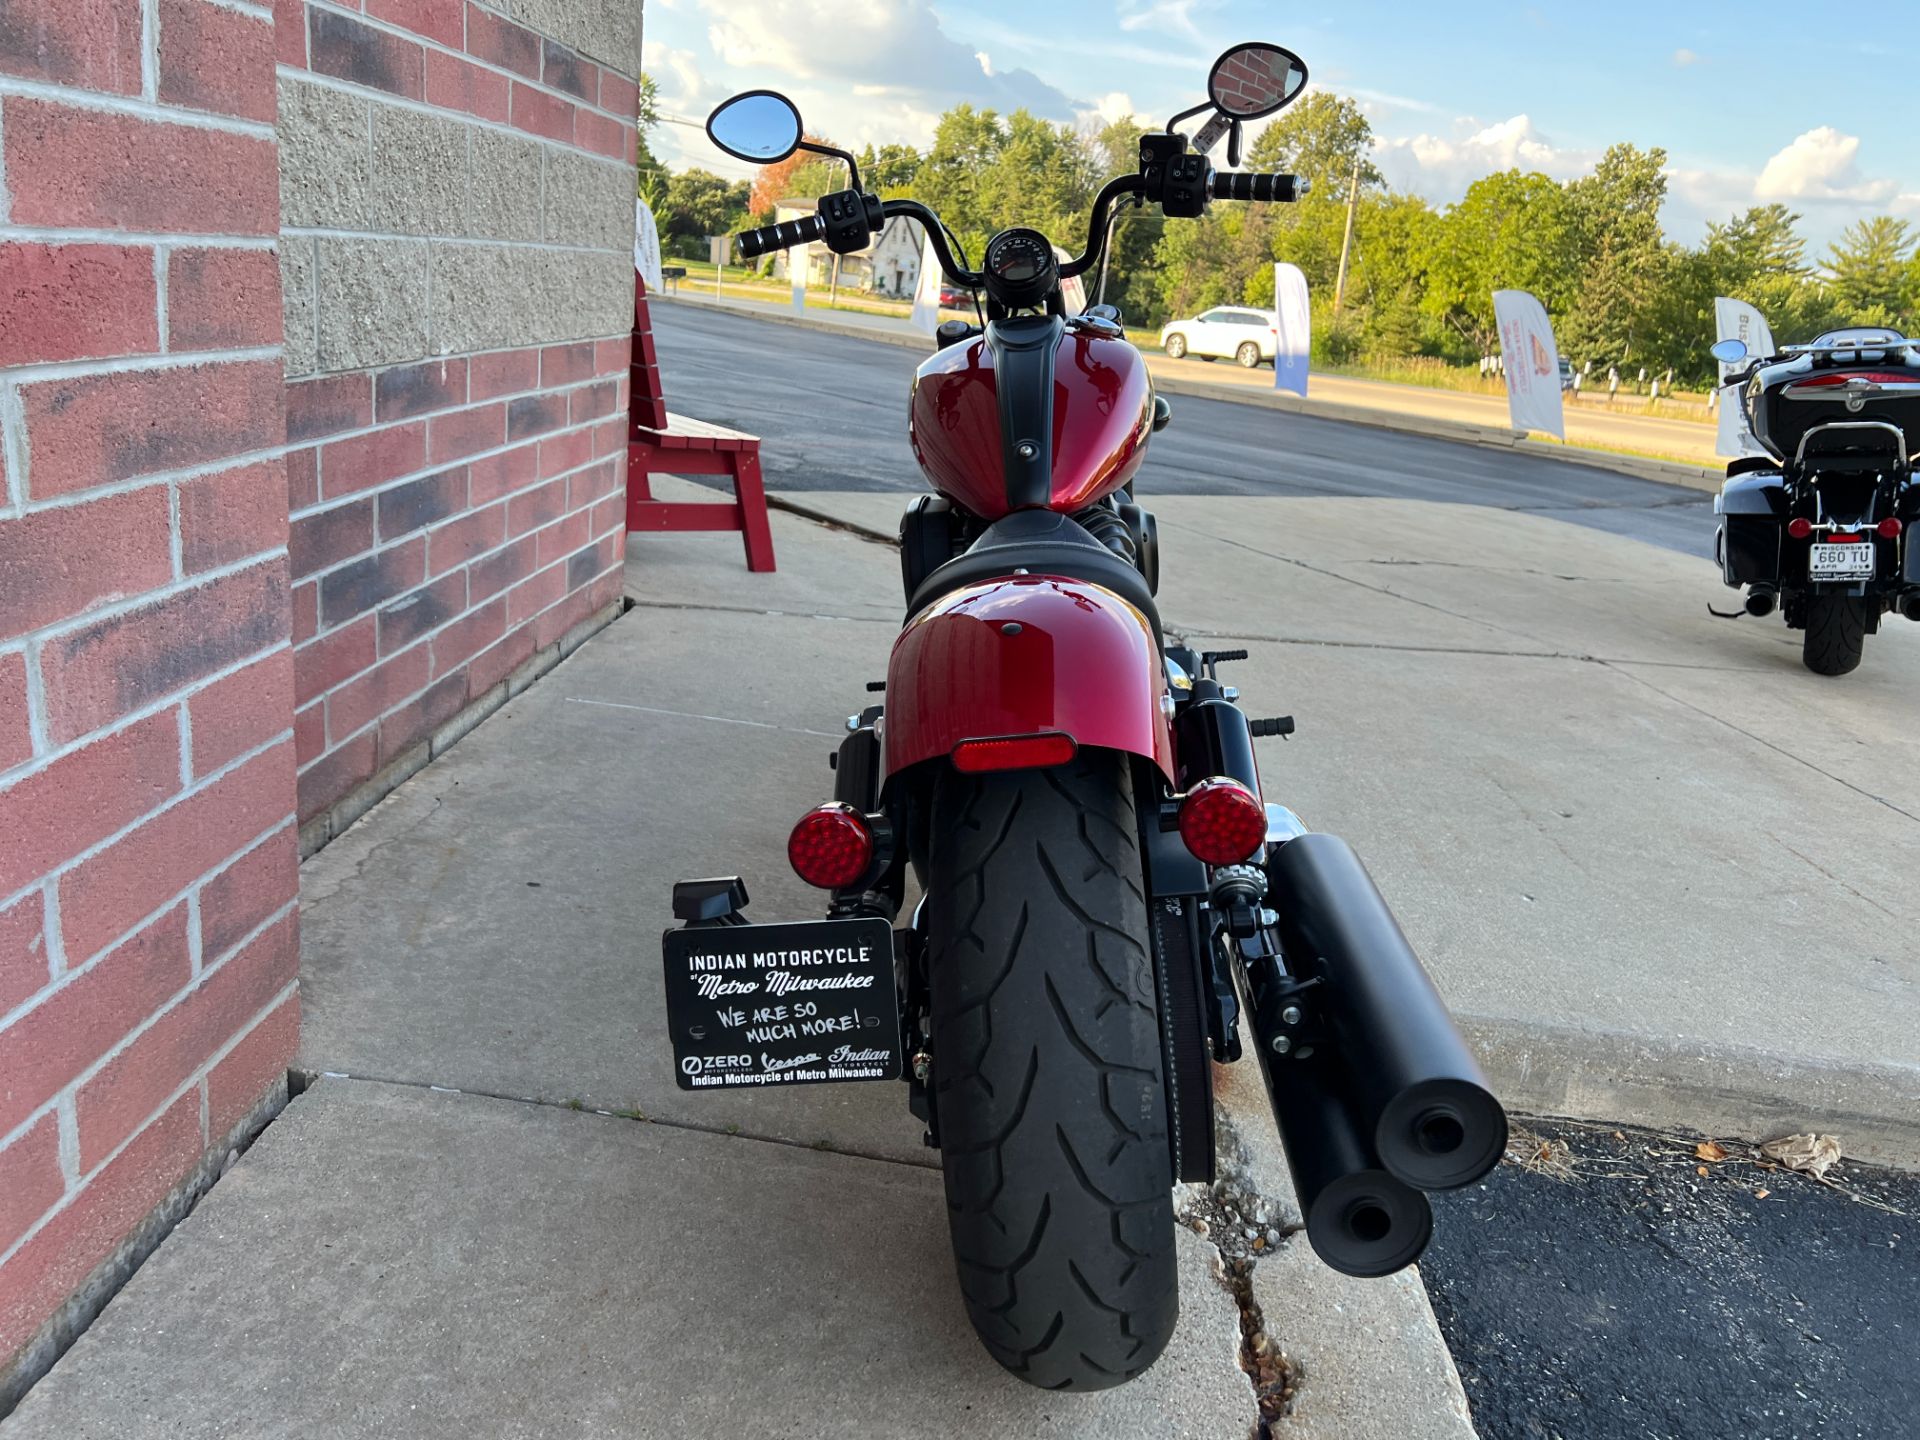 2022 Indian Motorcycle Chief Bobber in Muskego, Wisconsin - Photo 10